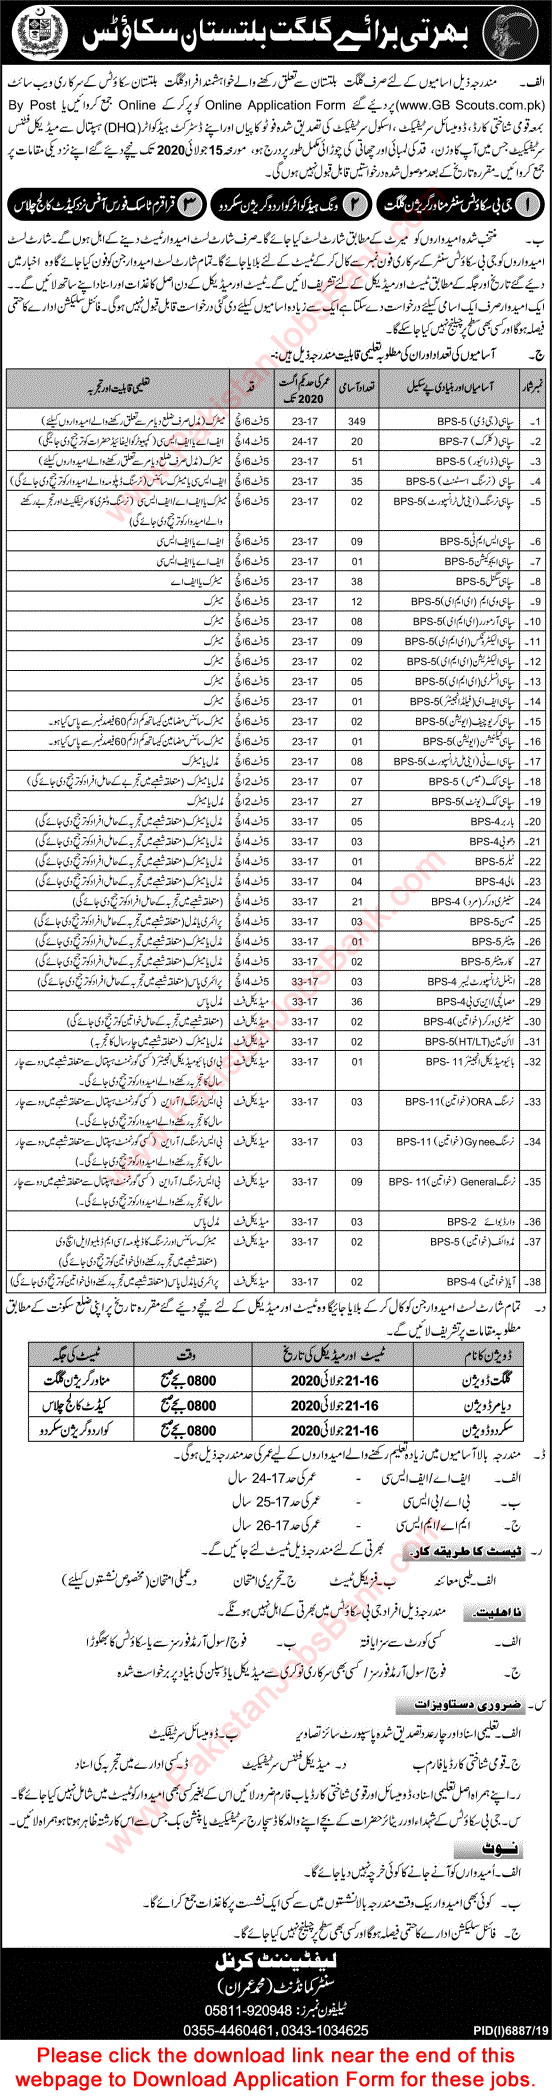 Gilgit Baltistan Scouts Jobs 2020 July Application Form GD Sipahi, Drivers & Others Latest